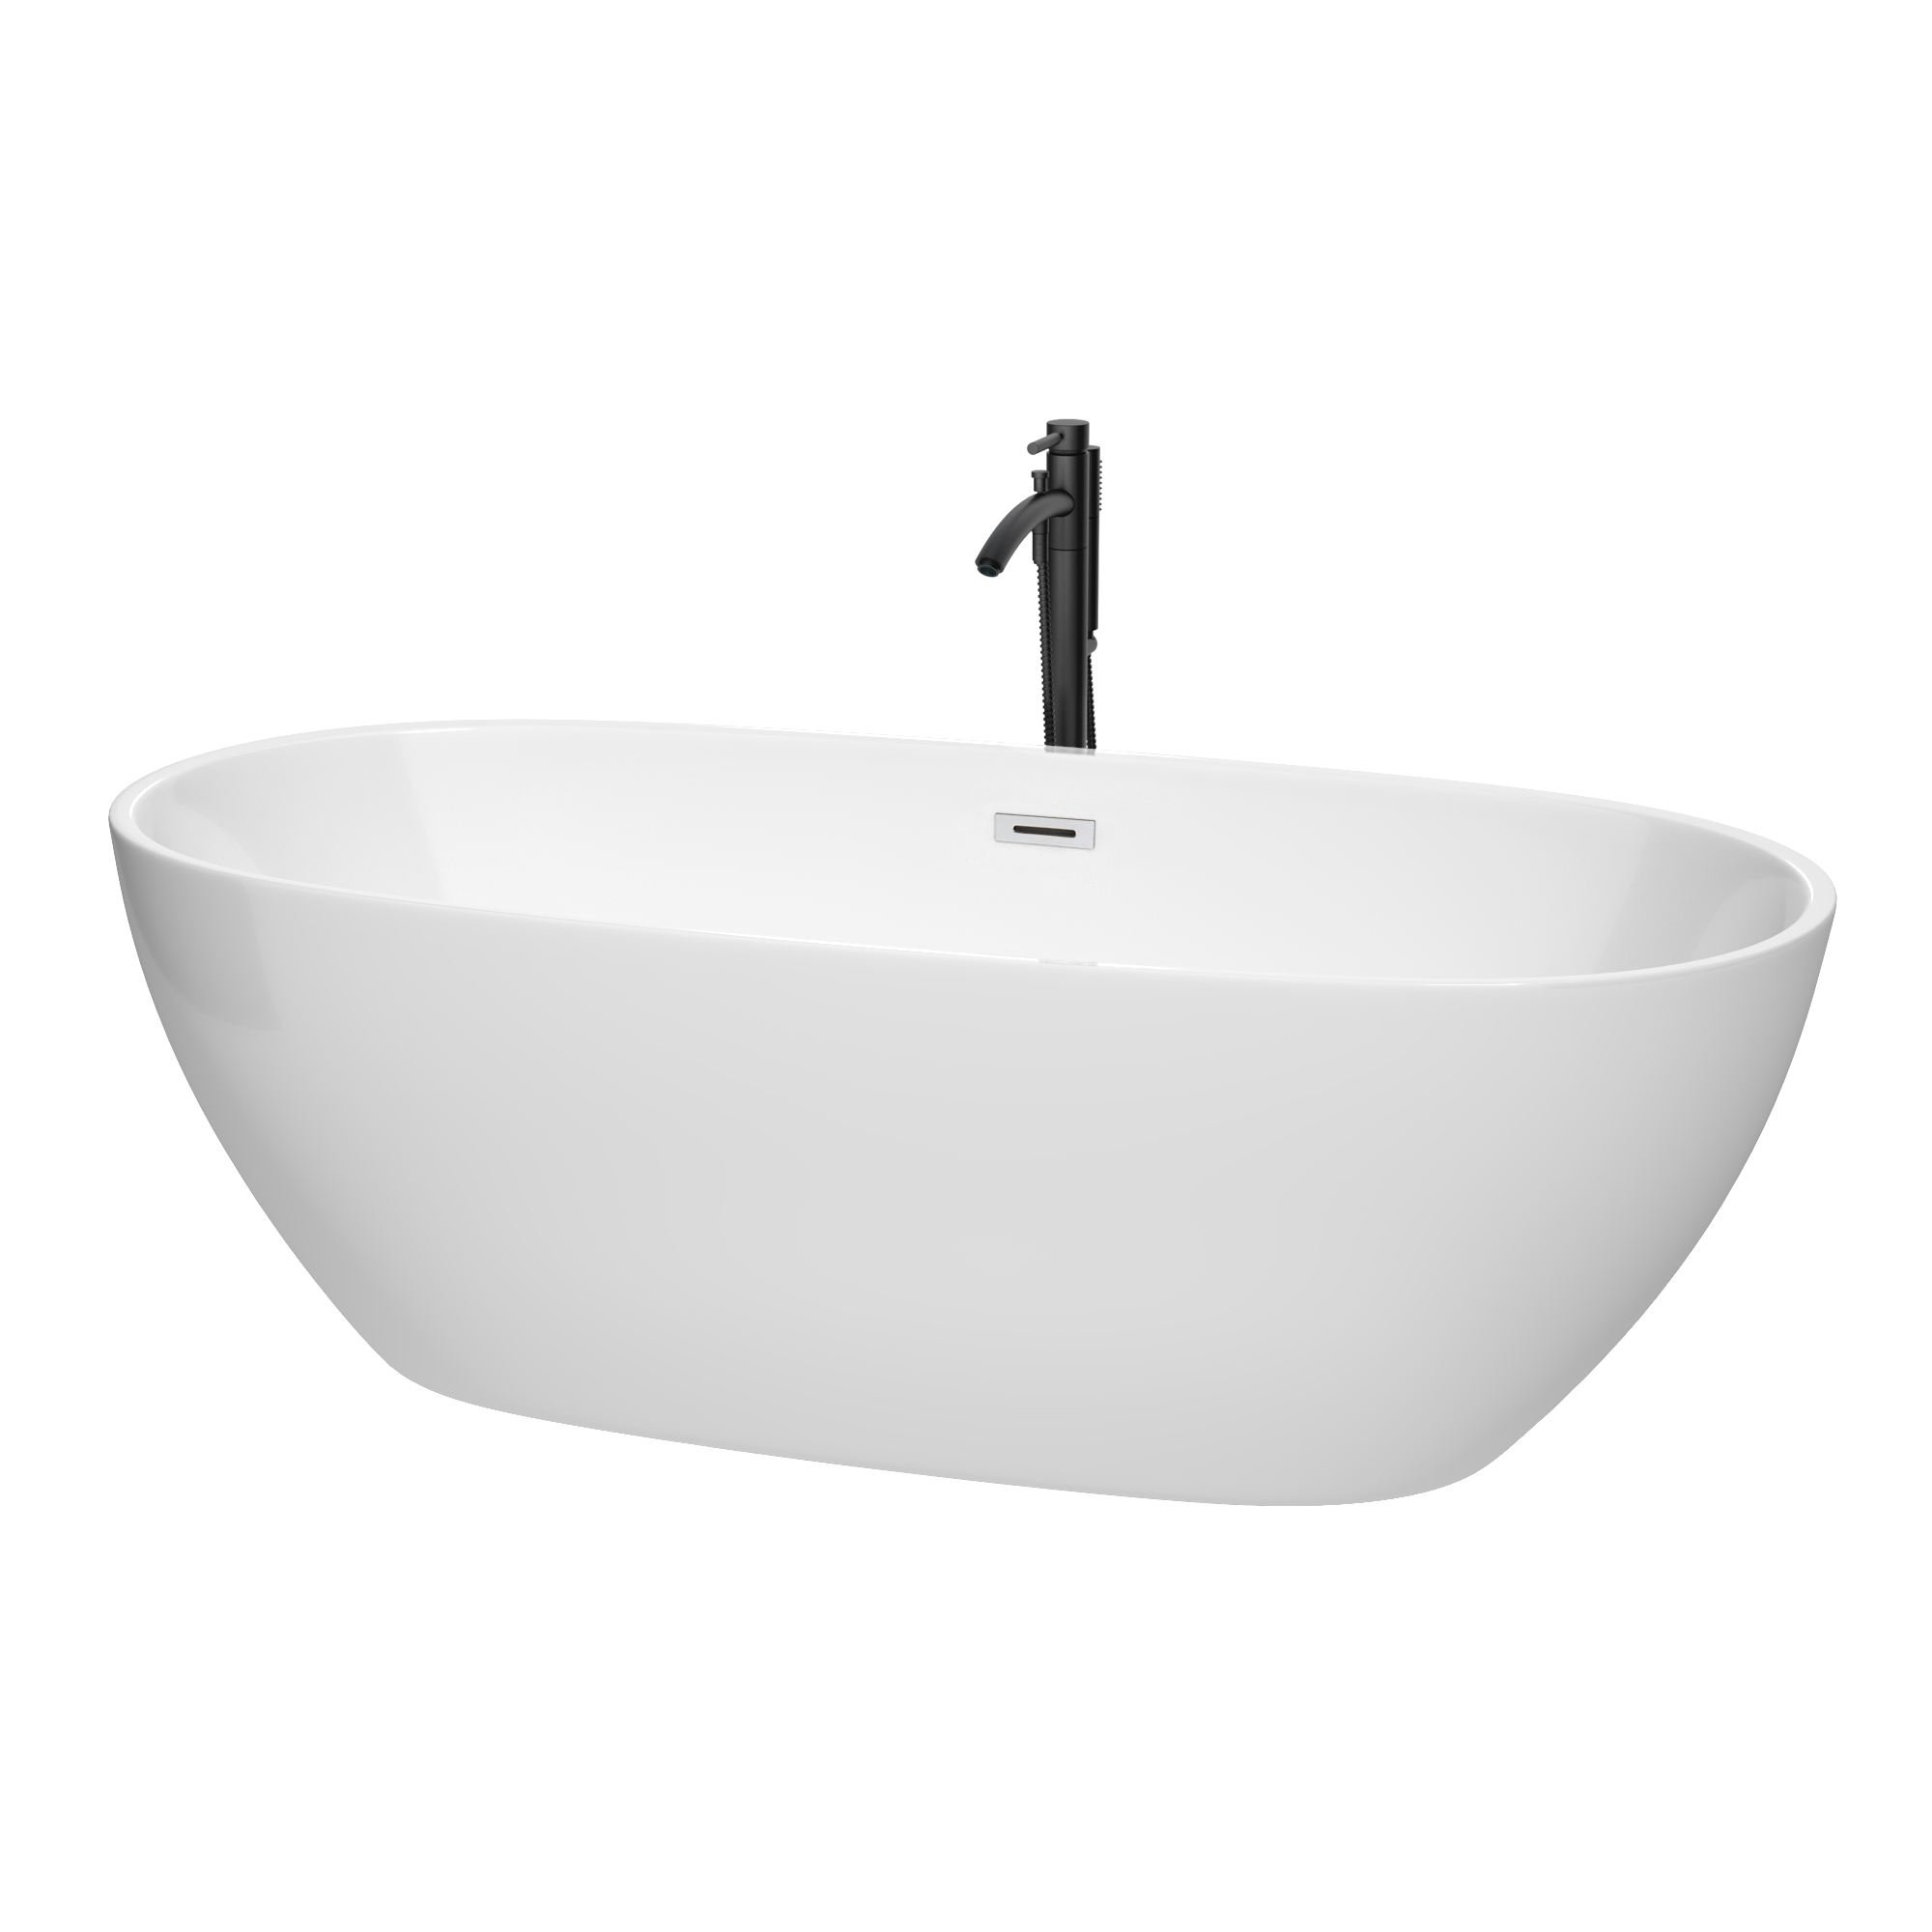 71" Freestanding Bathtub in White with Polished Chrome Trim and Floor Mounted Faucet in Matte Black Finish